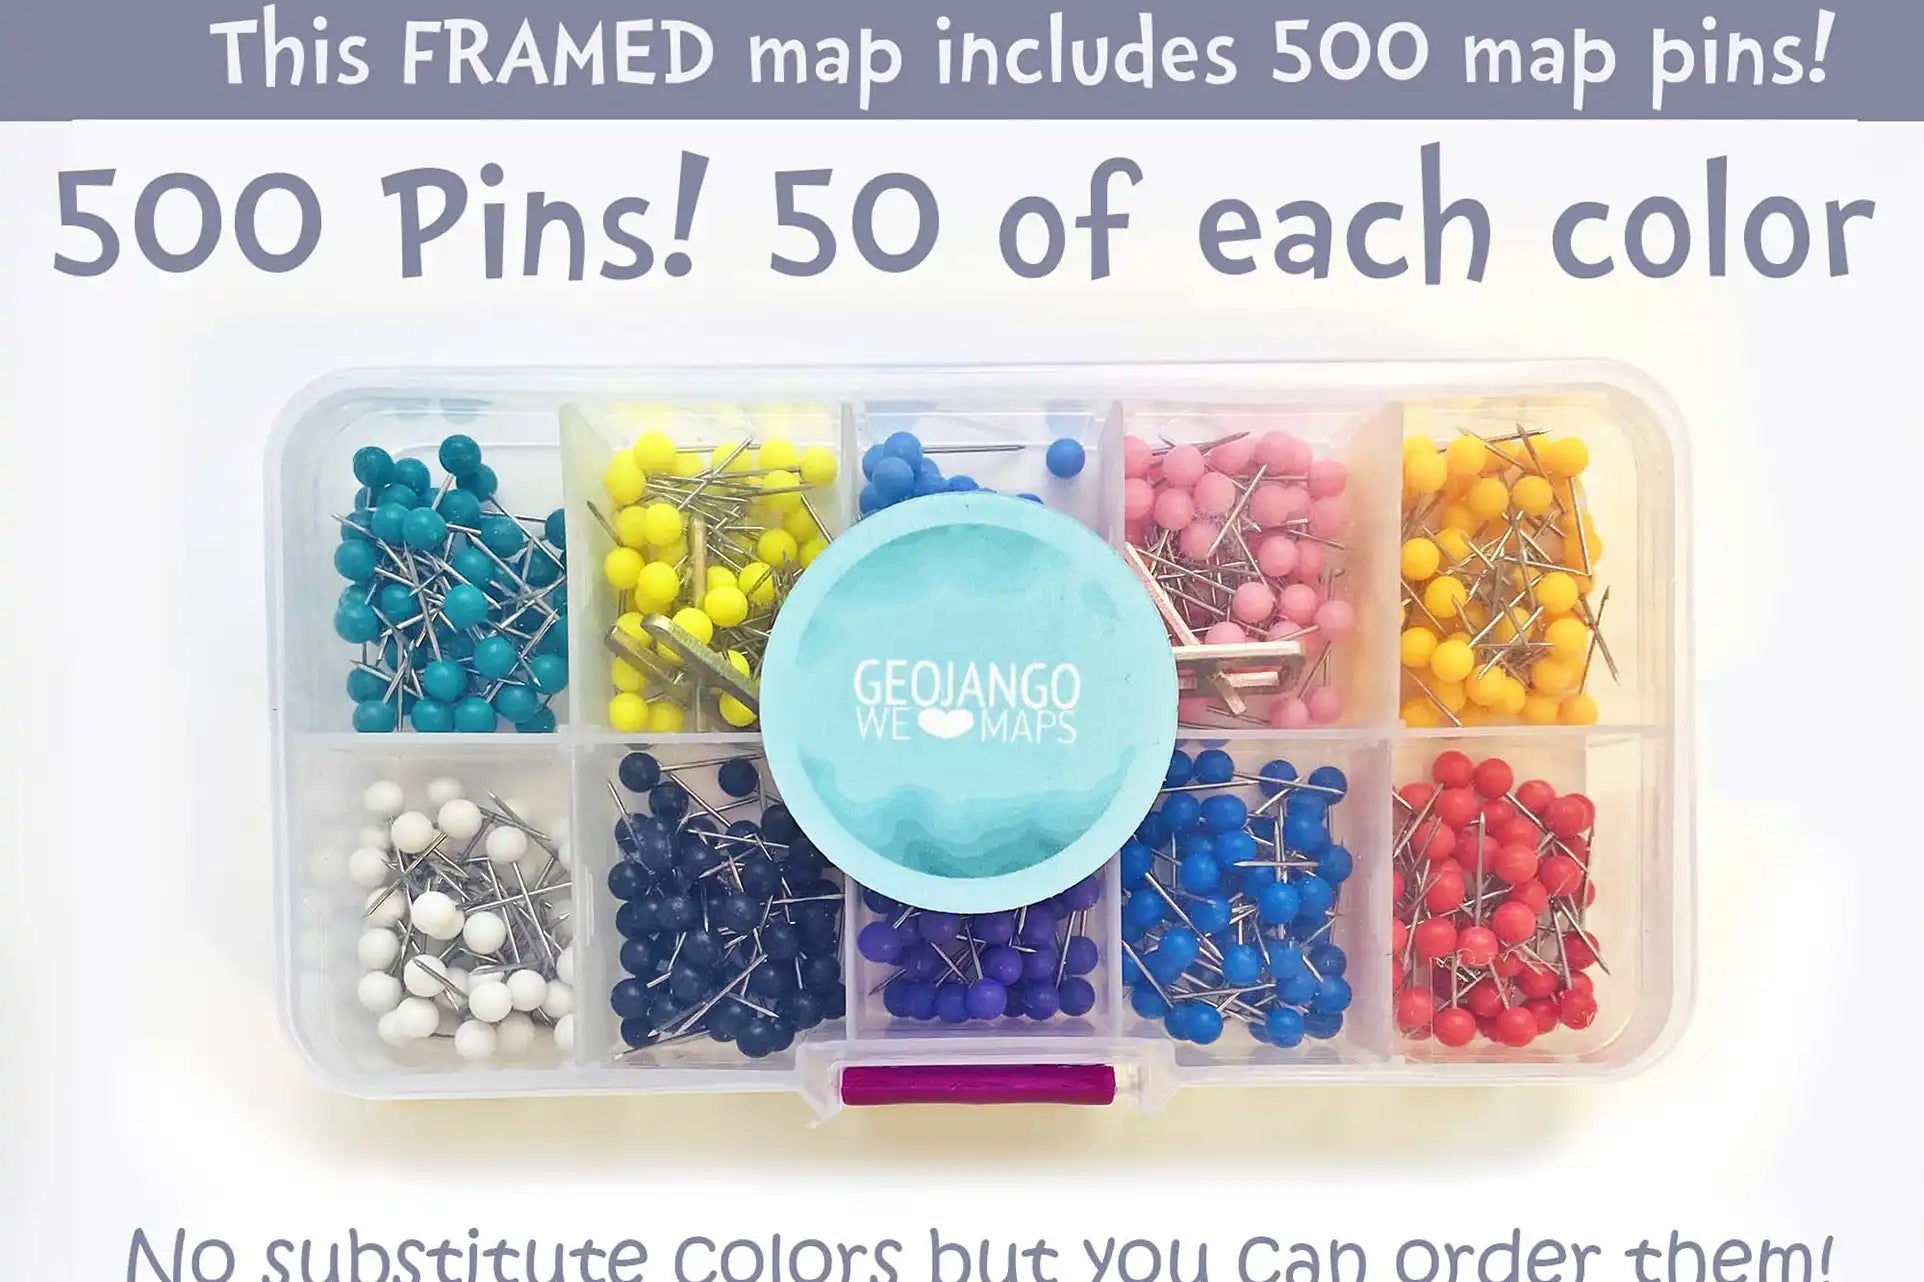 500 Map Pins Included